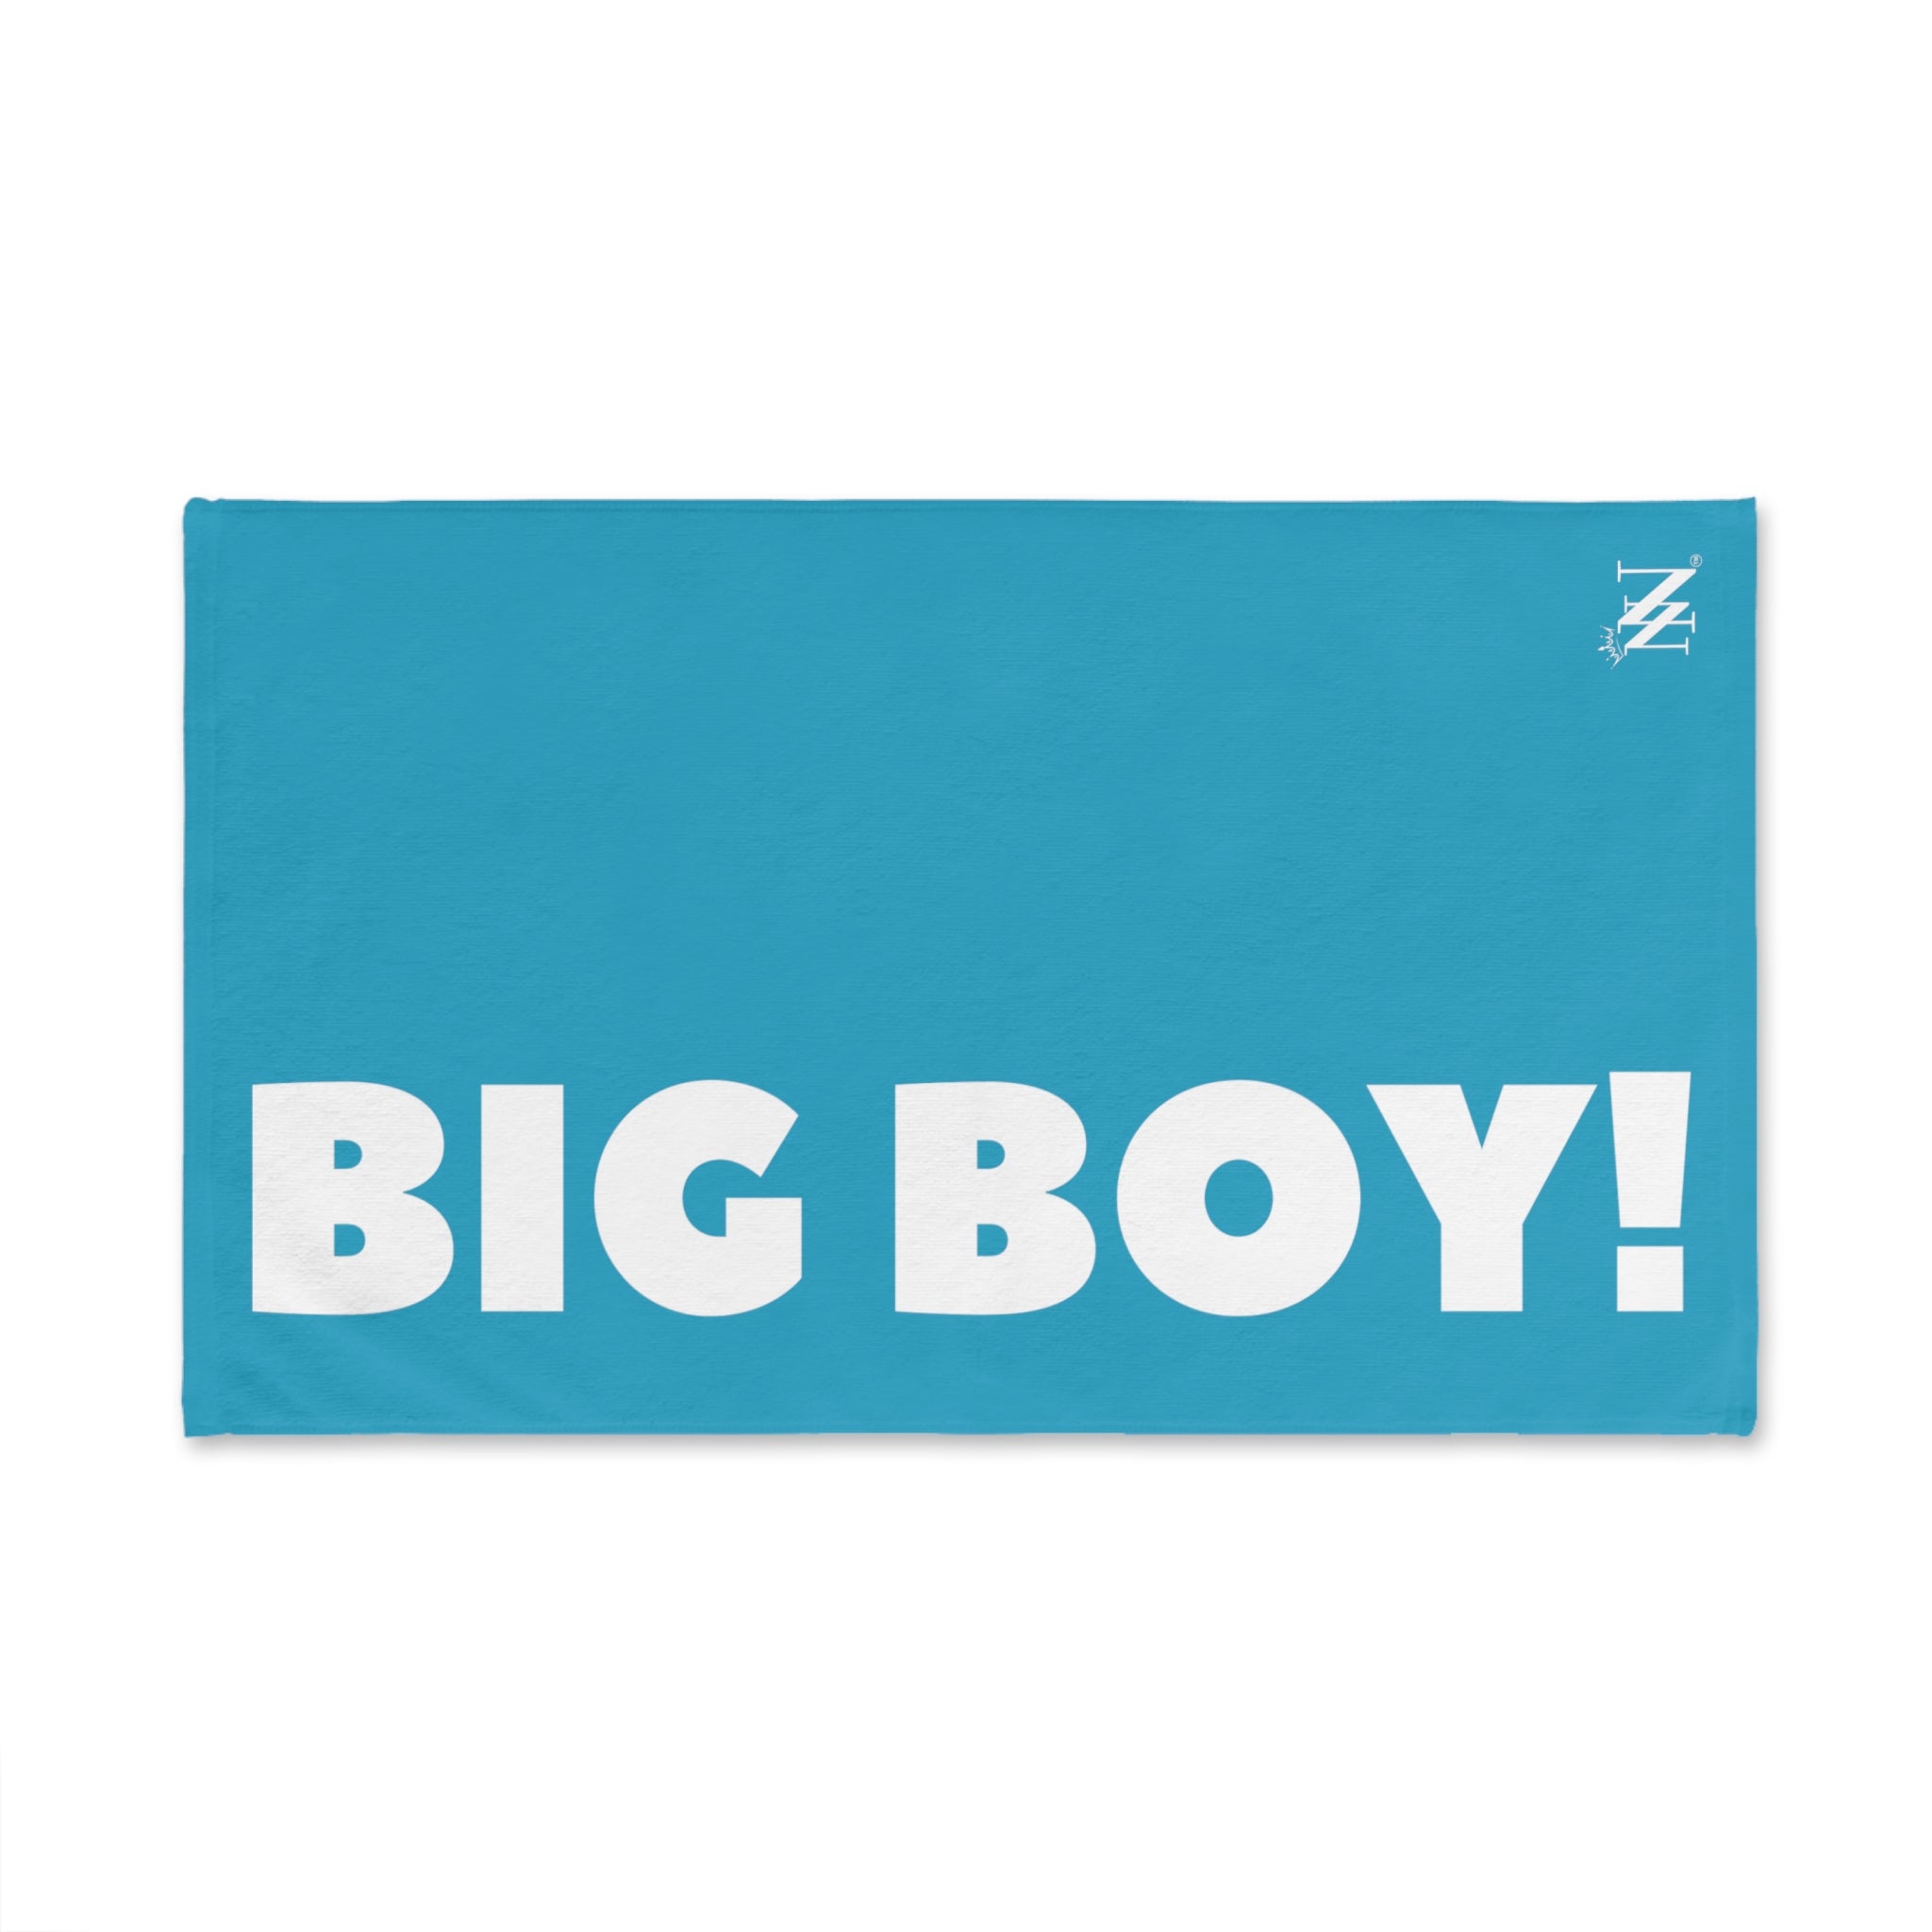 Big Boy Man Teal | Novelty Gifts for Boyfriend, Funny Towel Romantic Gift for Wedding Couple Fiance First Year Anniversary Valentines, Party Gag Gifts, Joke Humor Cloth for Husband Men BF NECTAR NAPKINS